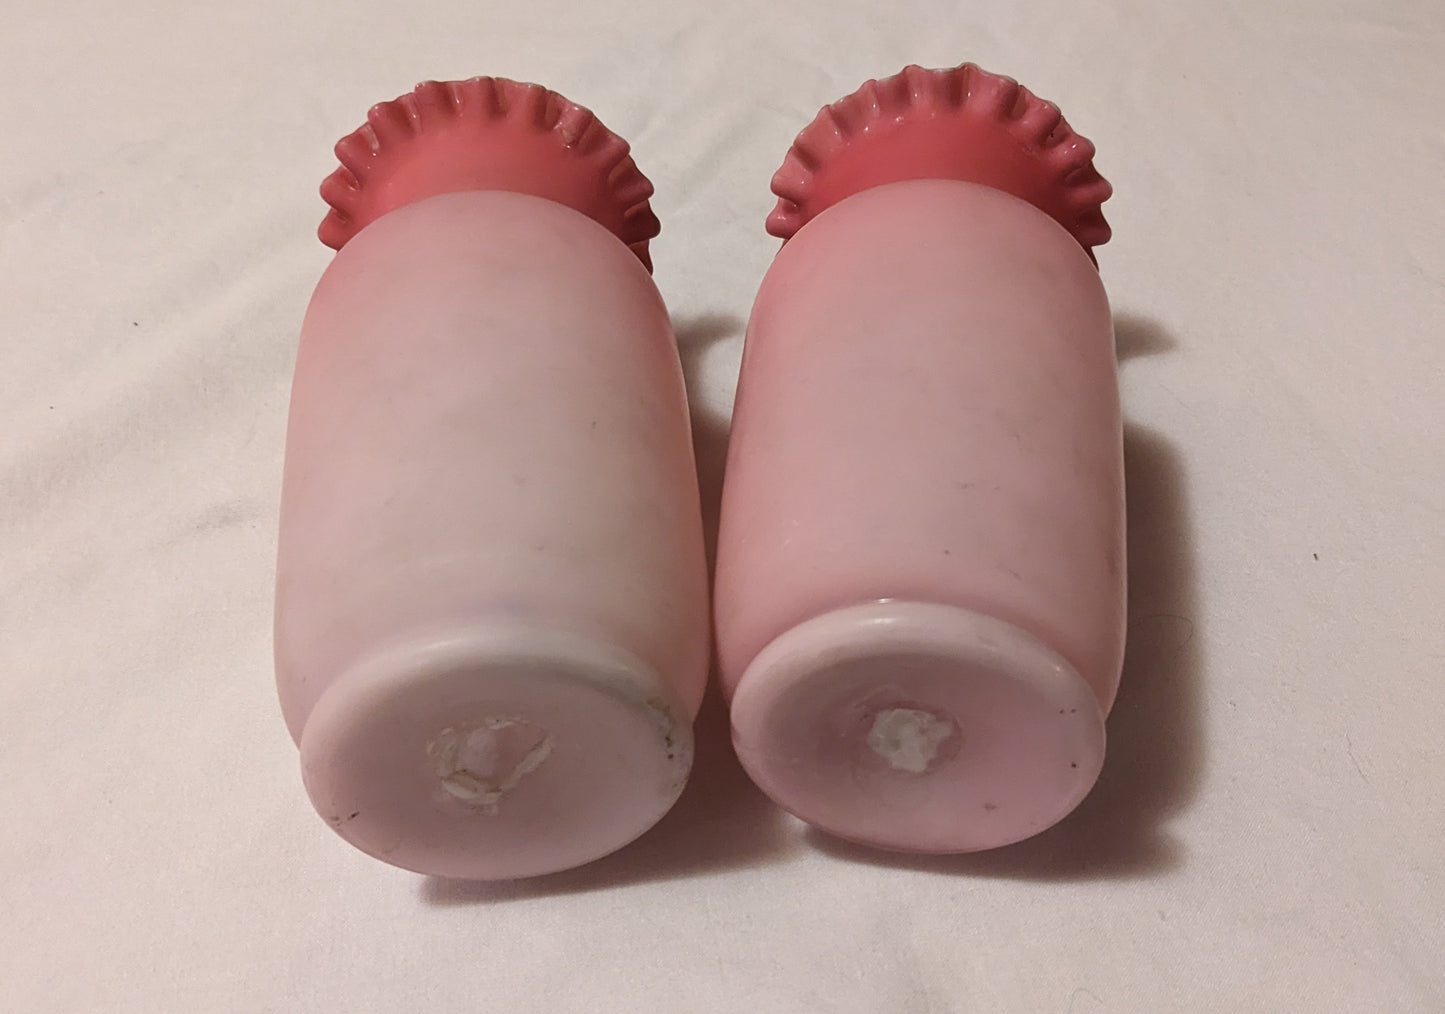 Vintage VASES; PAIR; Fenton-Style Ruffled Top; Rose Ombre Satin Glass - Hand Blown - Granny core